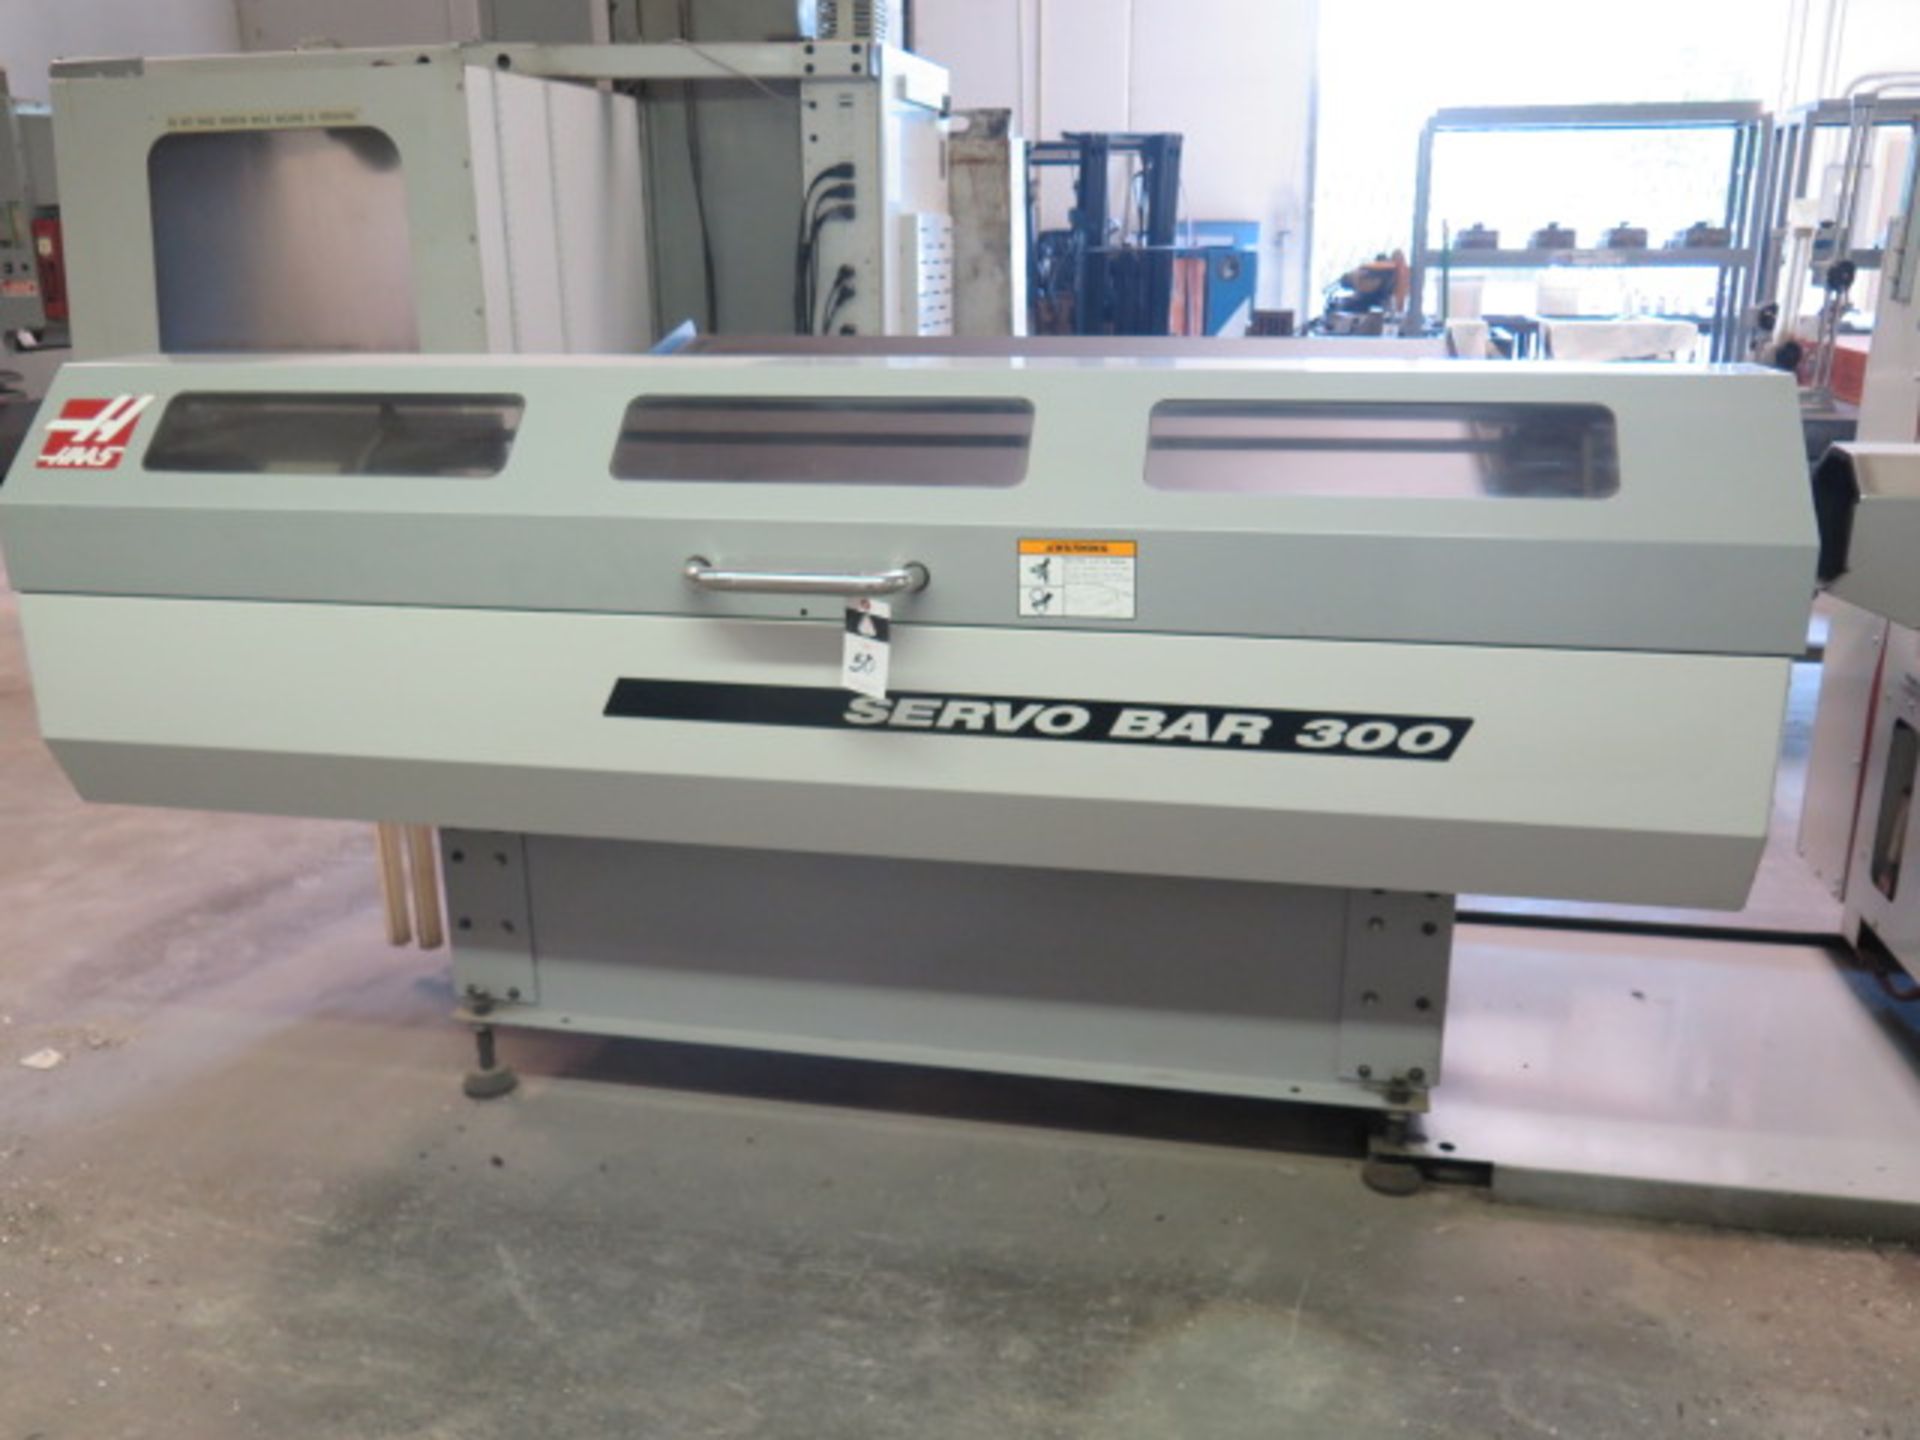 Haas Servobar 300 Automatic Bar Loader / Feeder s/n 92046 w/ Spindle Liner Set (SOLD AS-IS - NO WARR